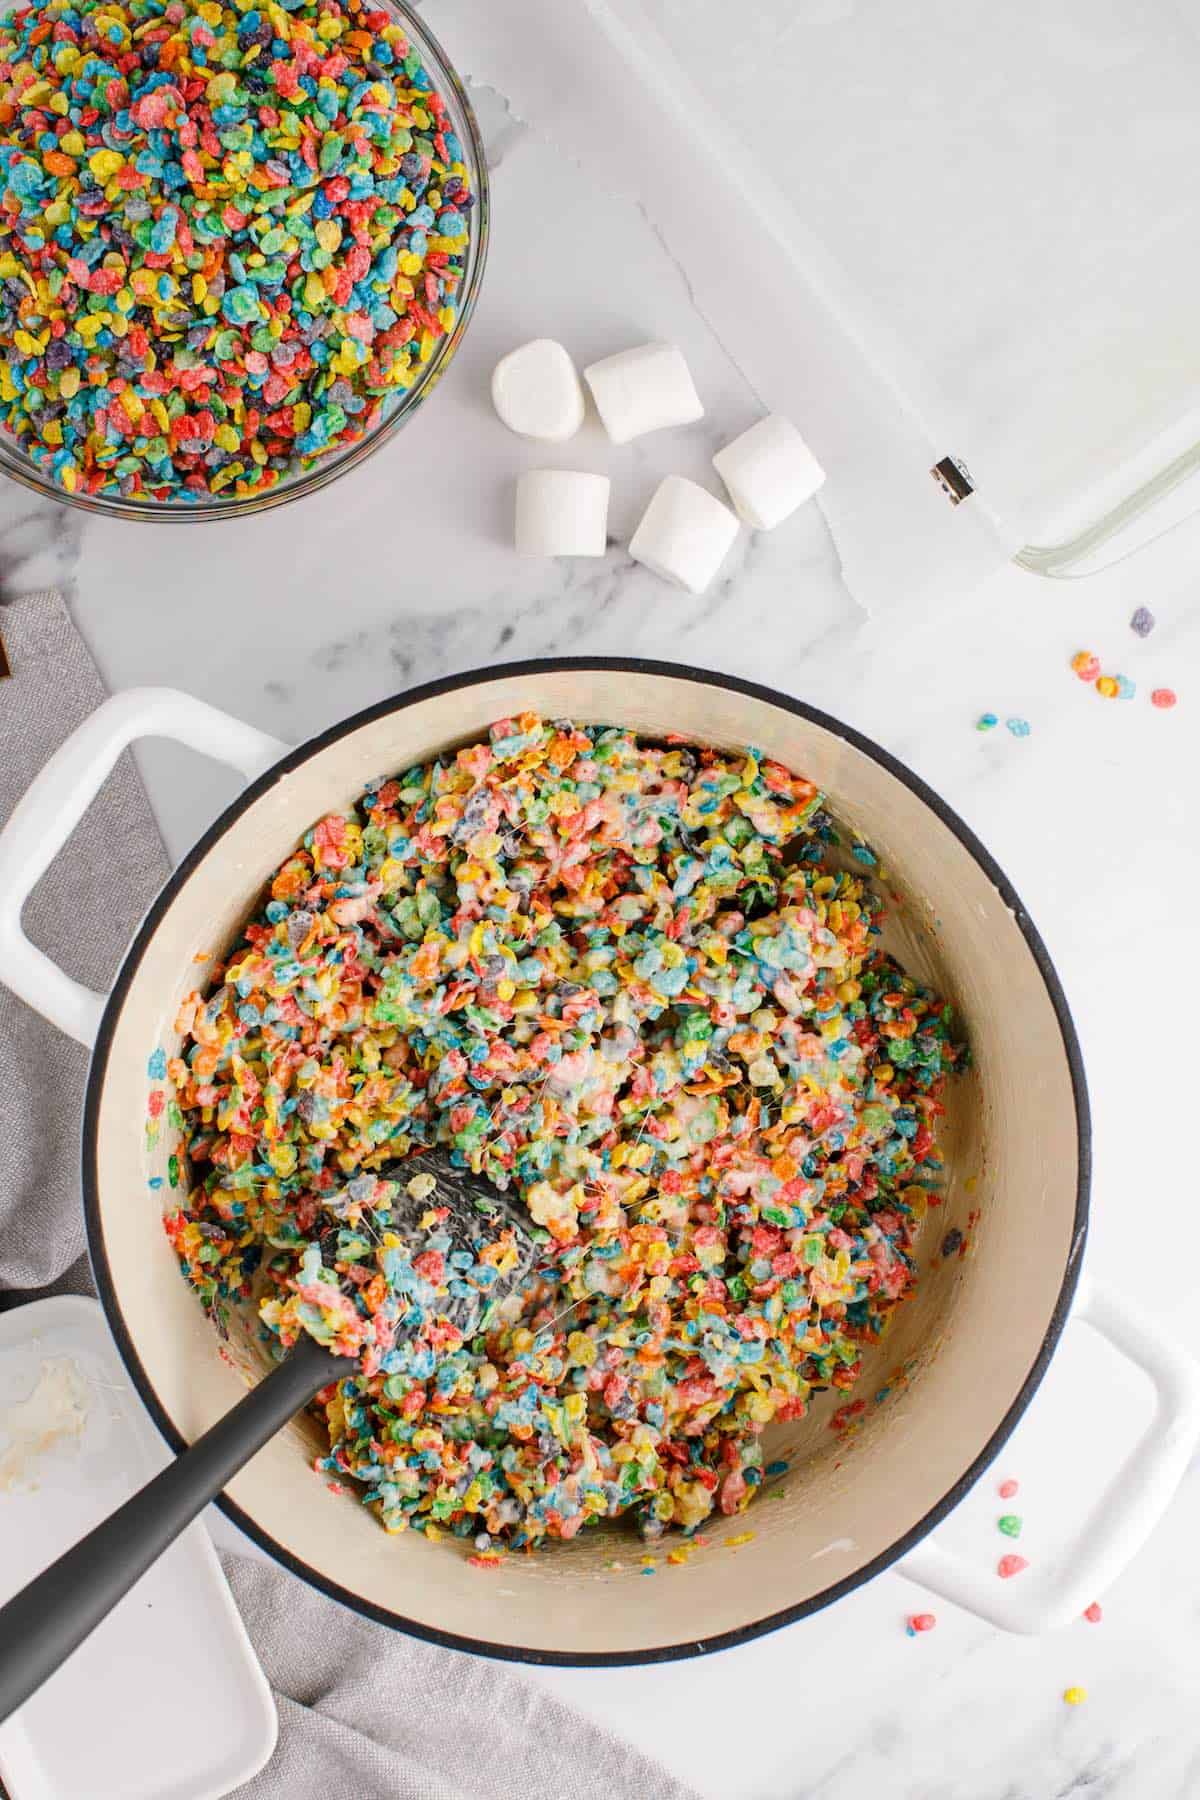 A large saucepan with melted marshmallows and cereal combined with a spoon.